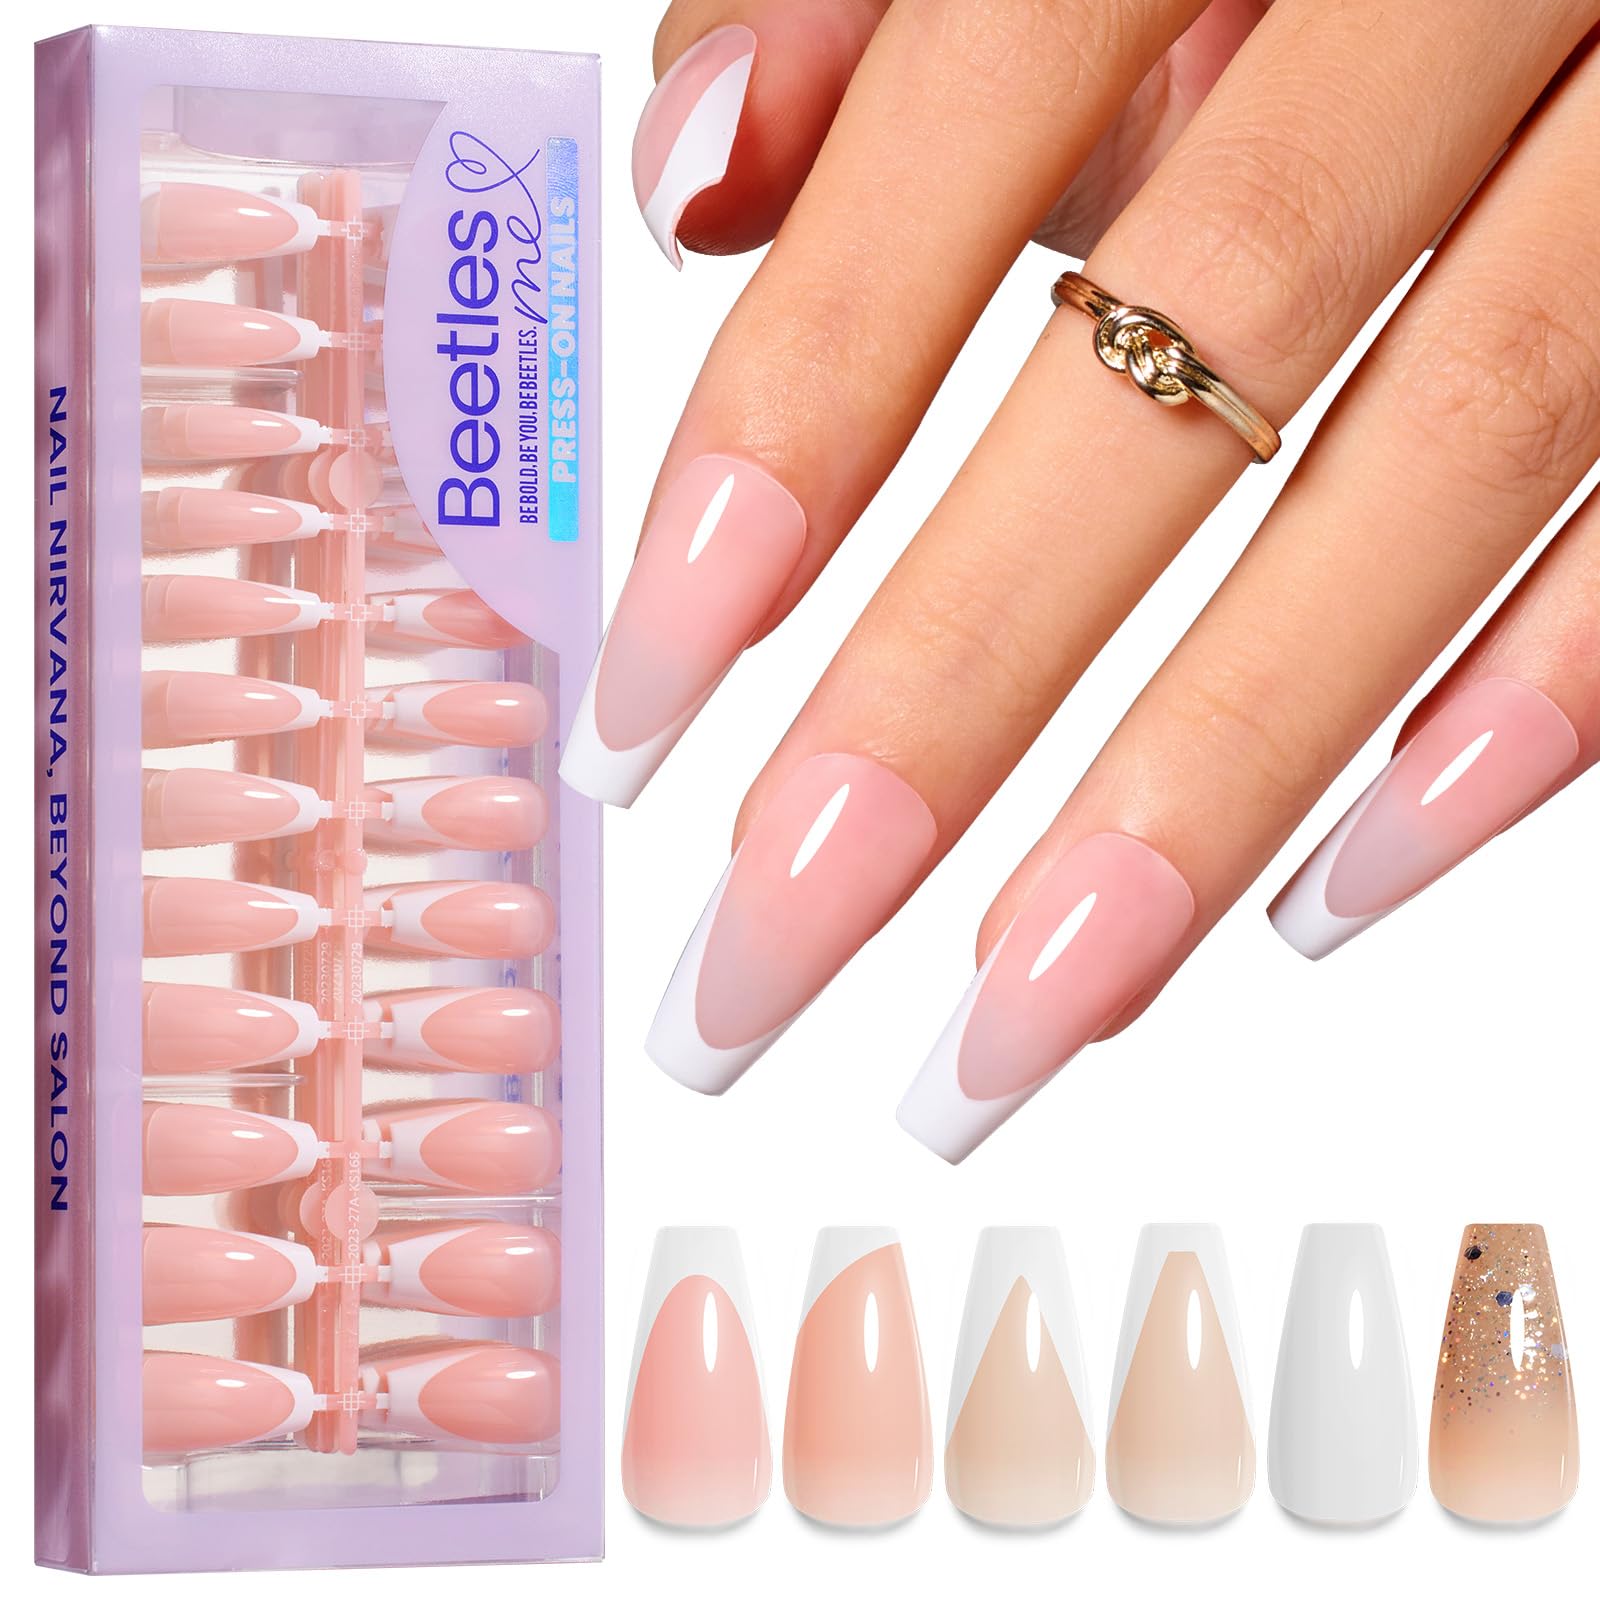 Classic Chic | Medium Coffin Press On Nails 144 Pcs in 6 Colors